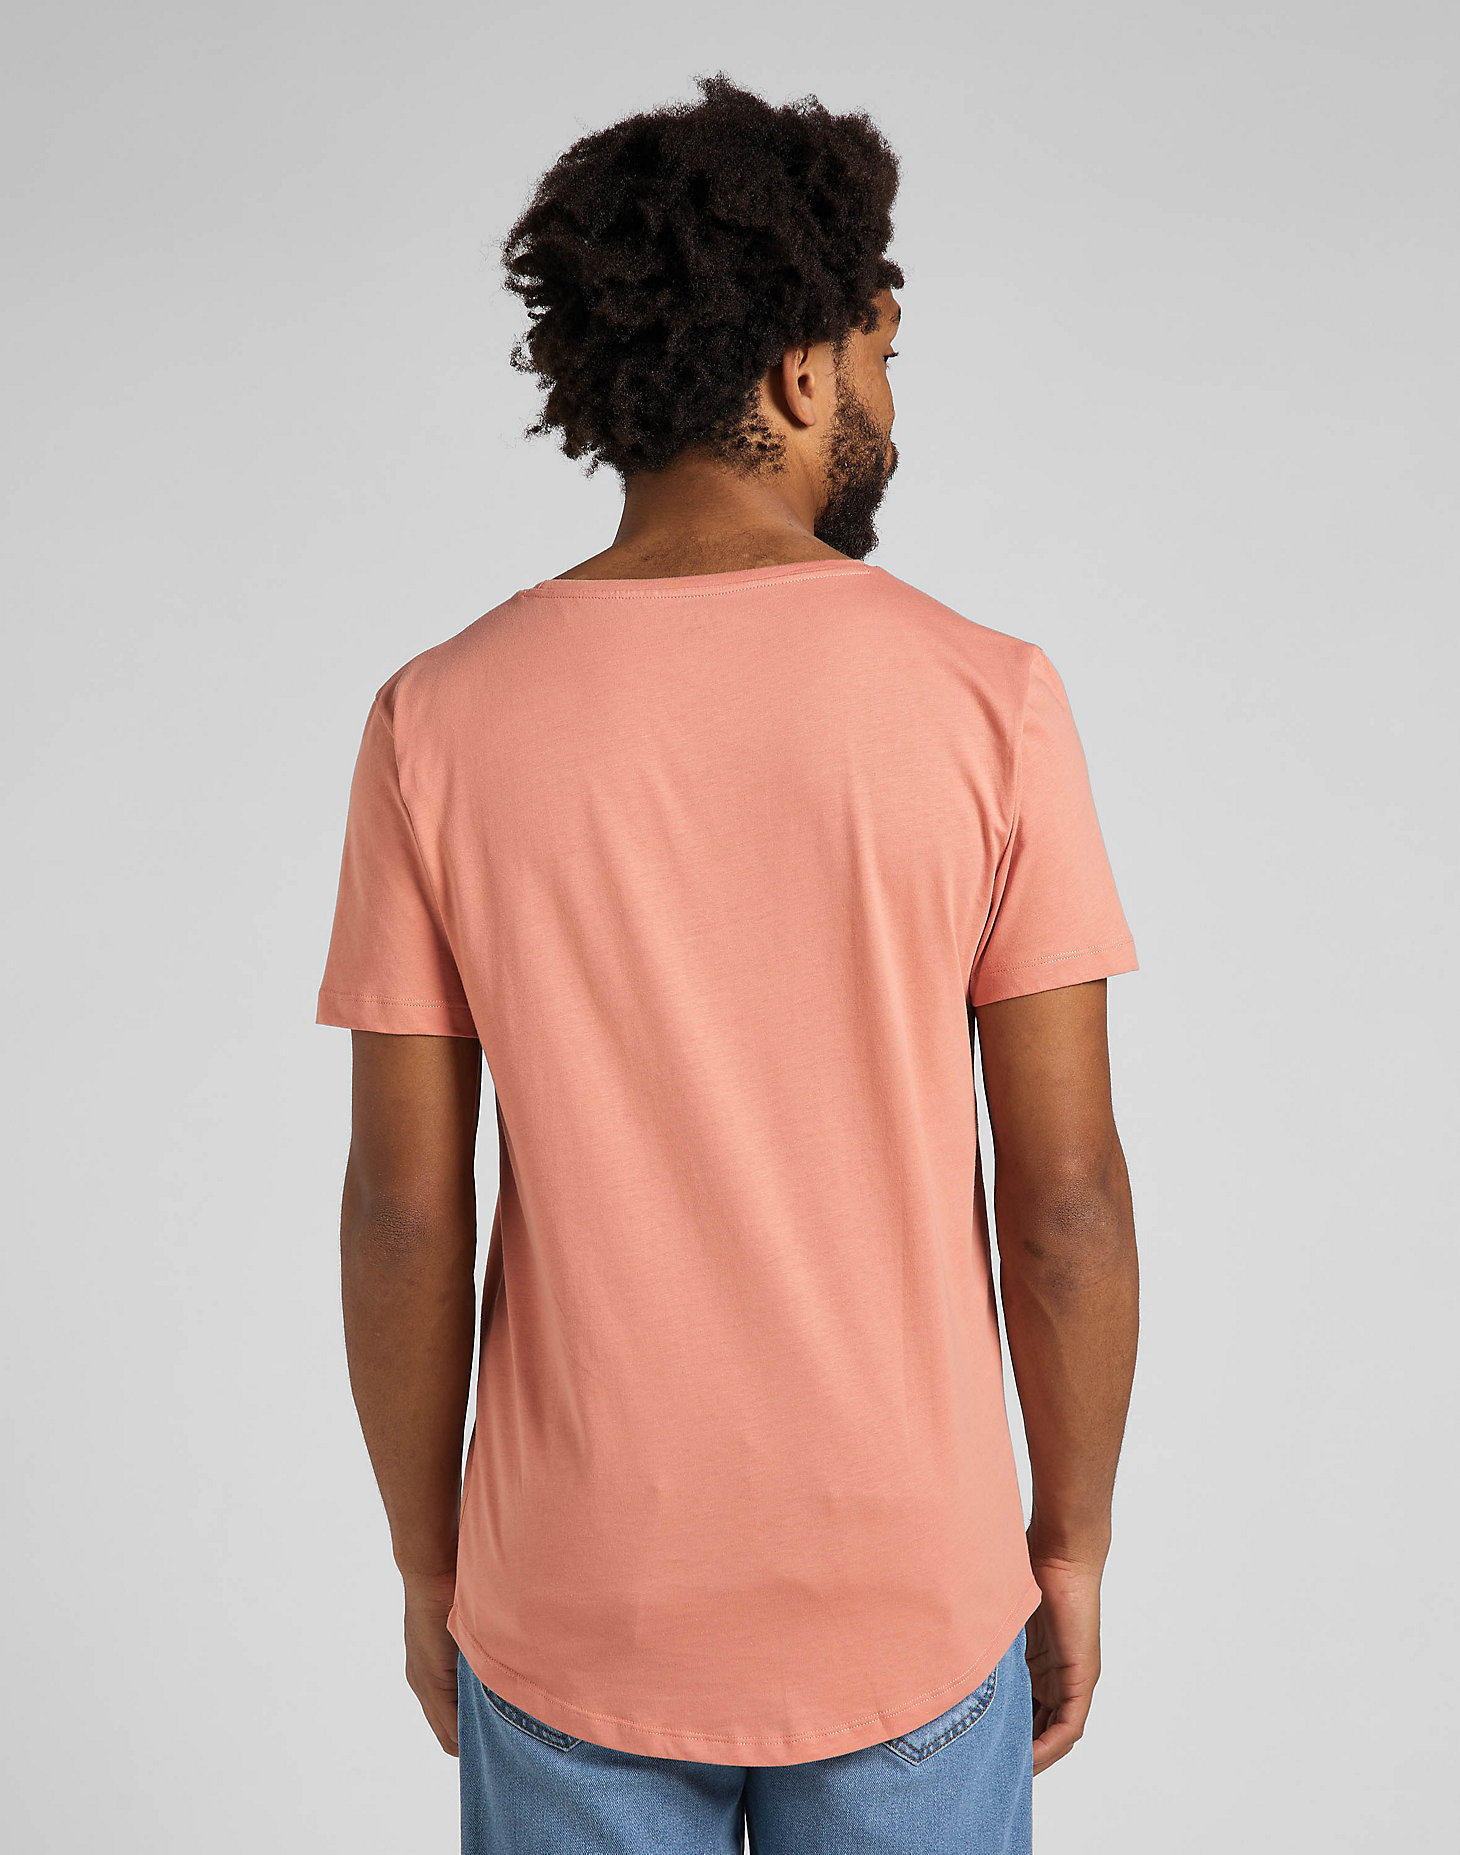 Shaped Tee in Rust alternative view 1